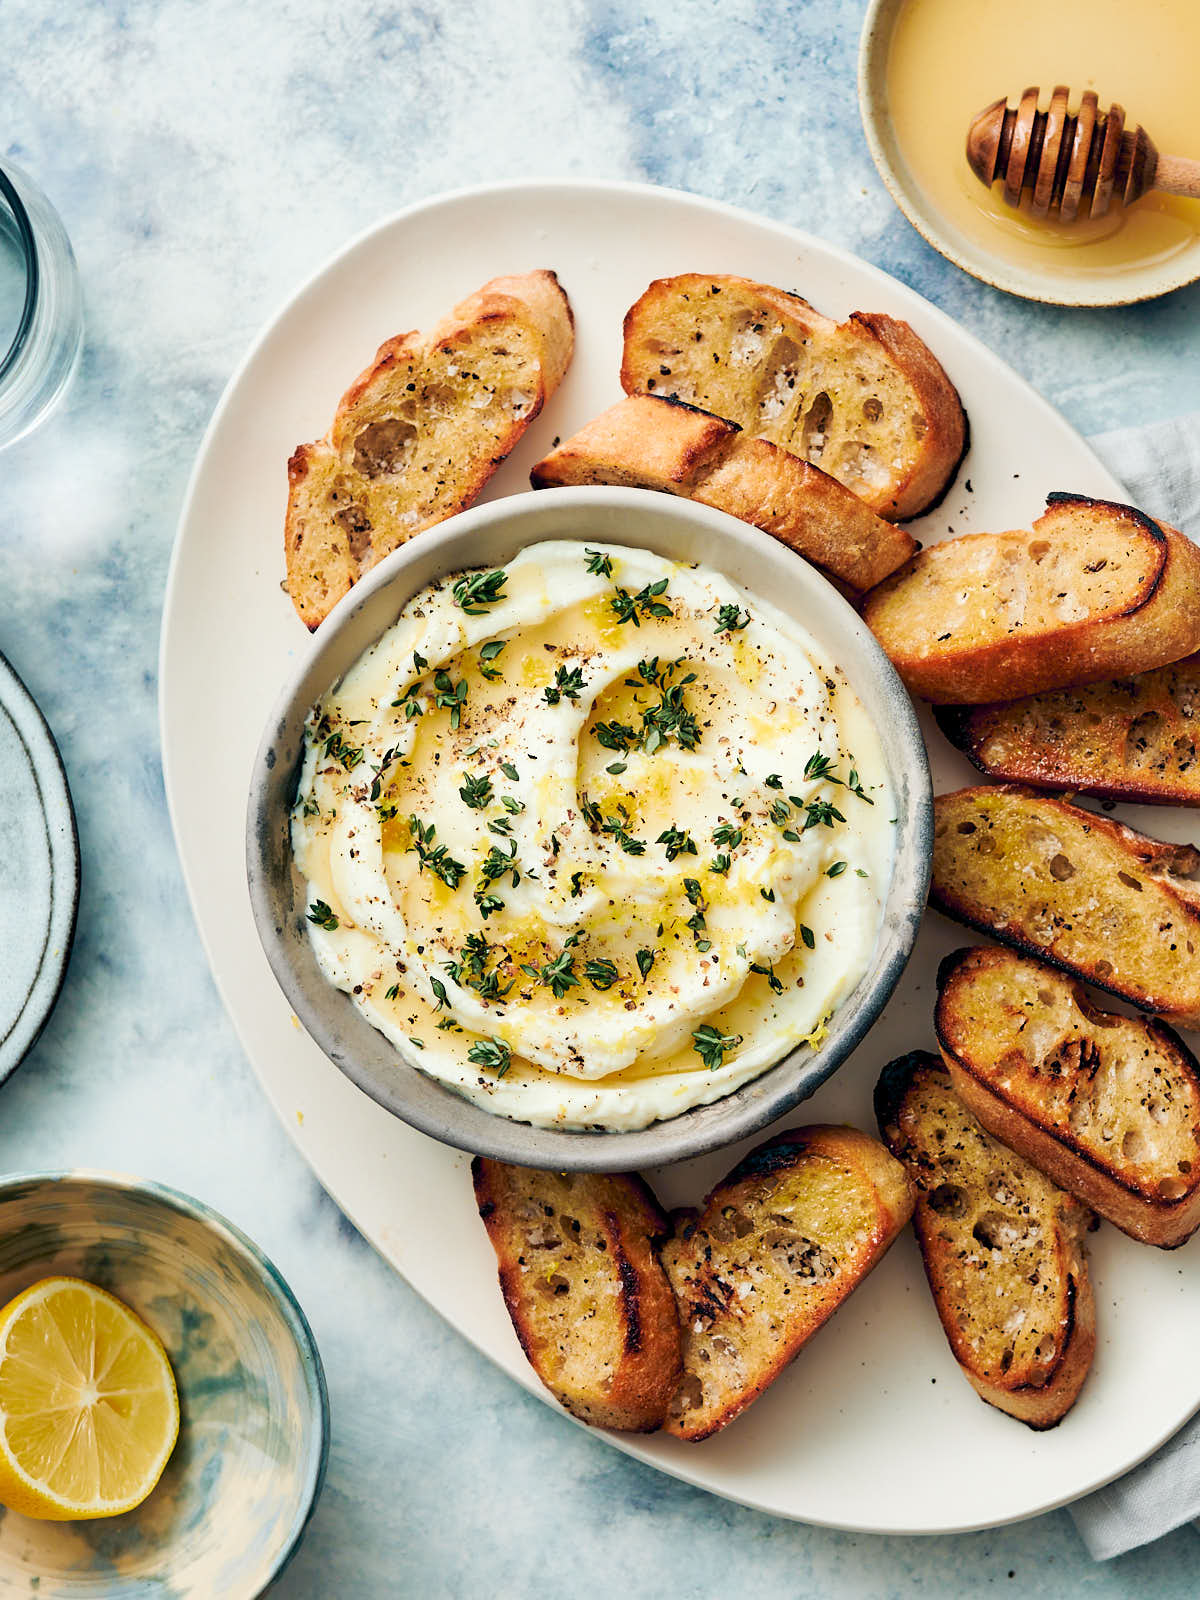 Whipped ricotta dip with honey in a bowl being served with toasted bread.